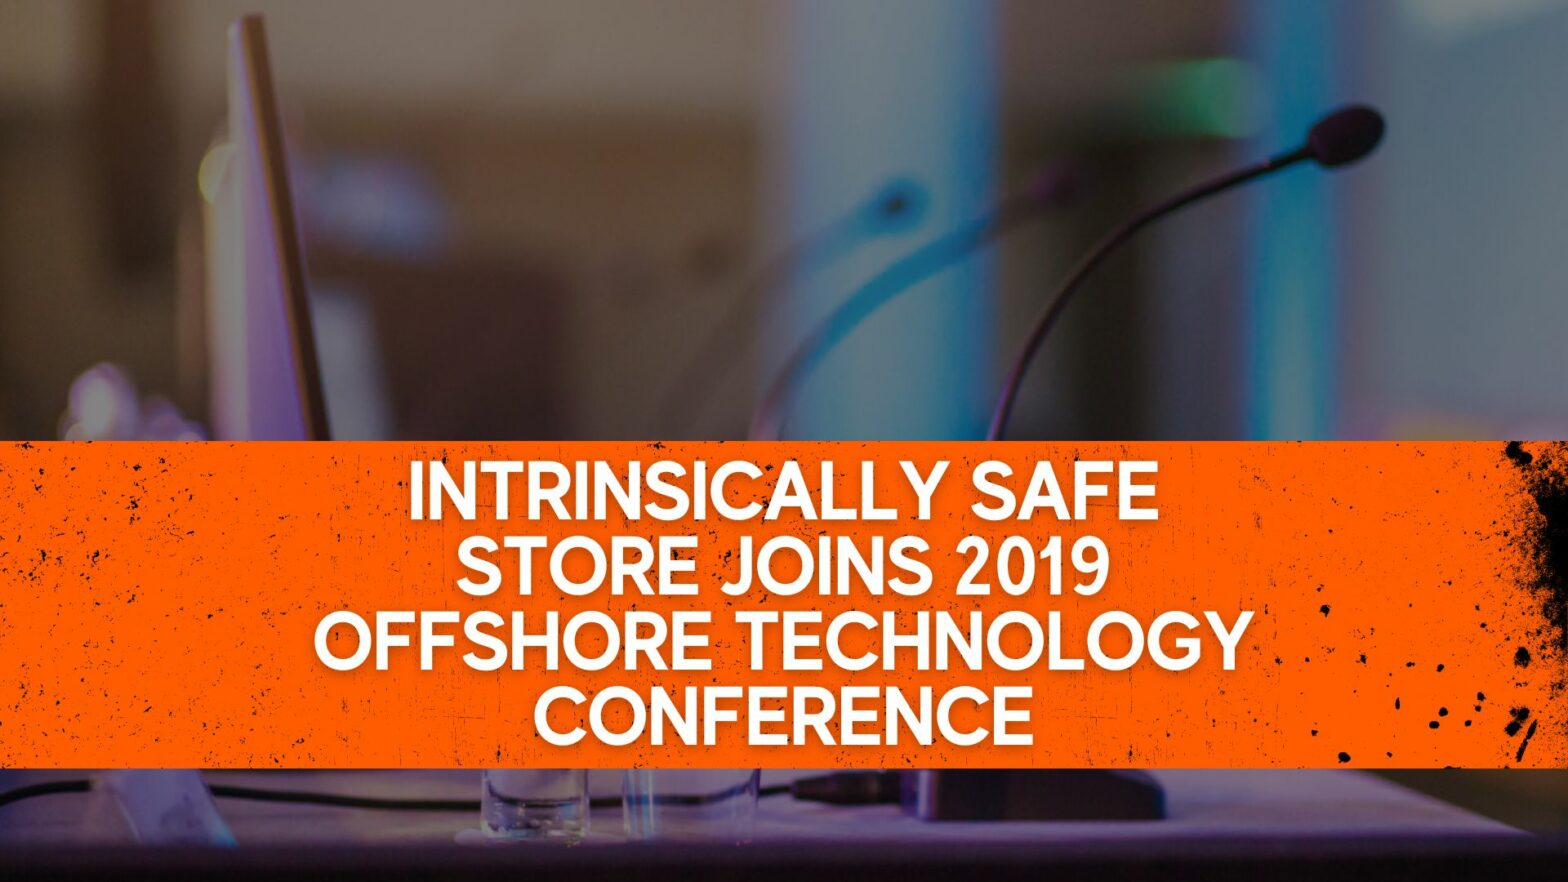 Intrinsically Safe Store Joins 2019 Offshore Technology Conference